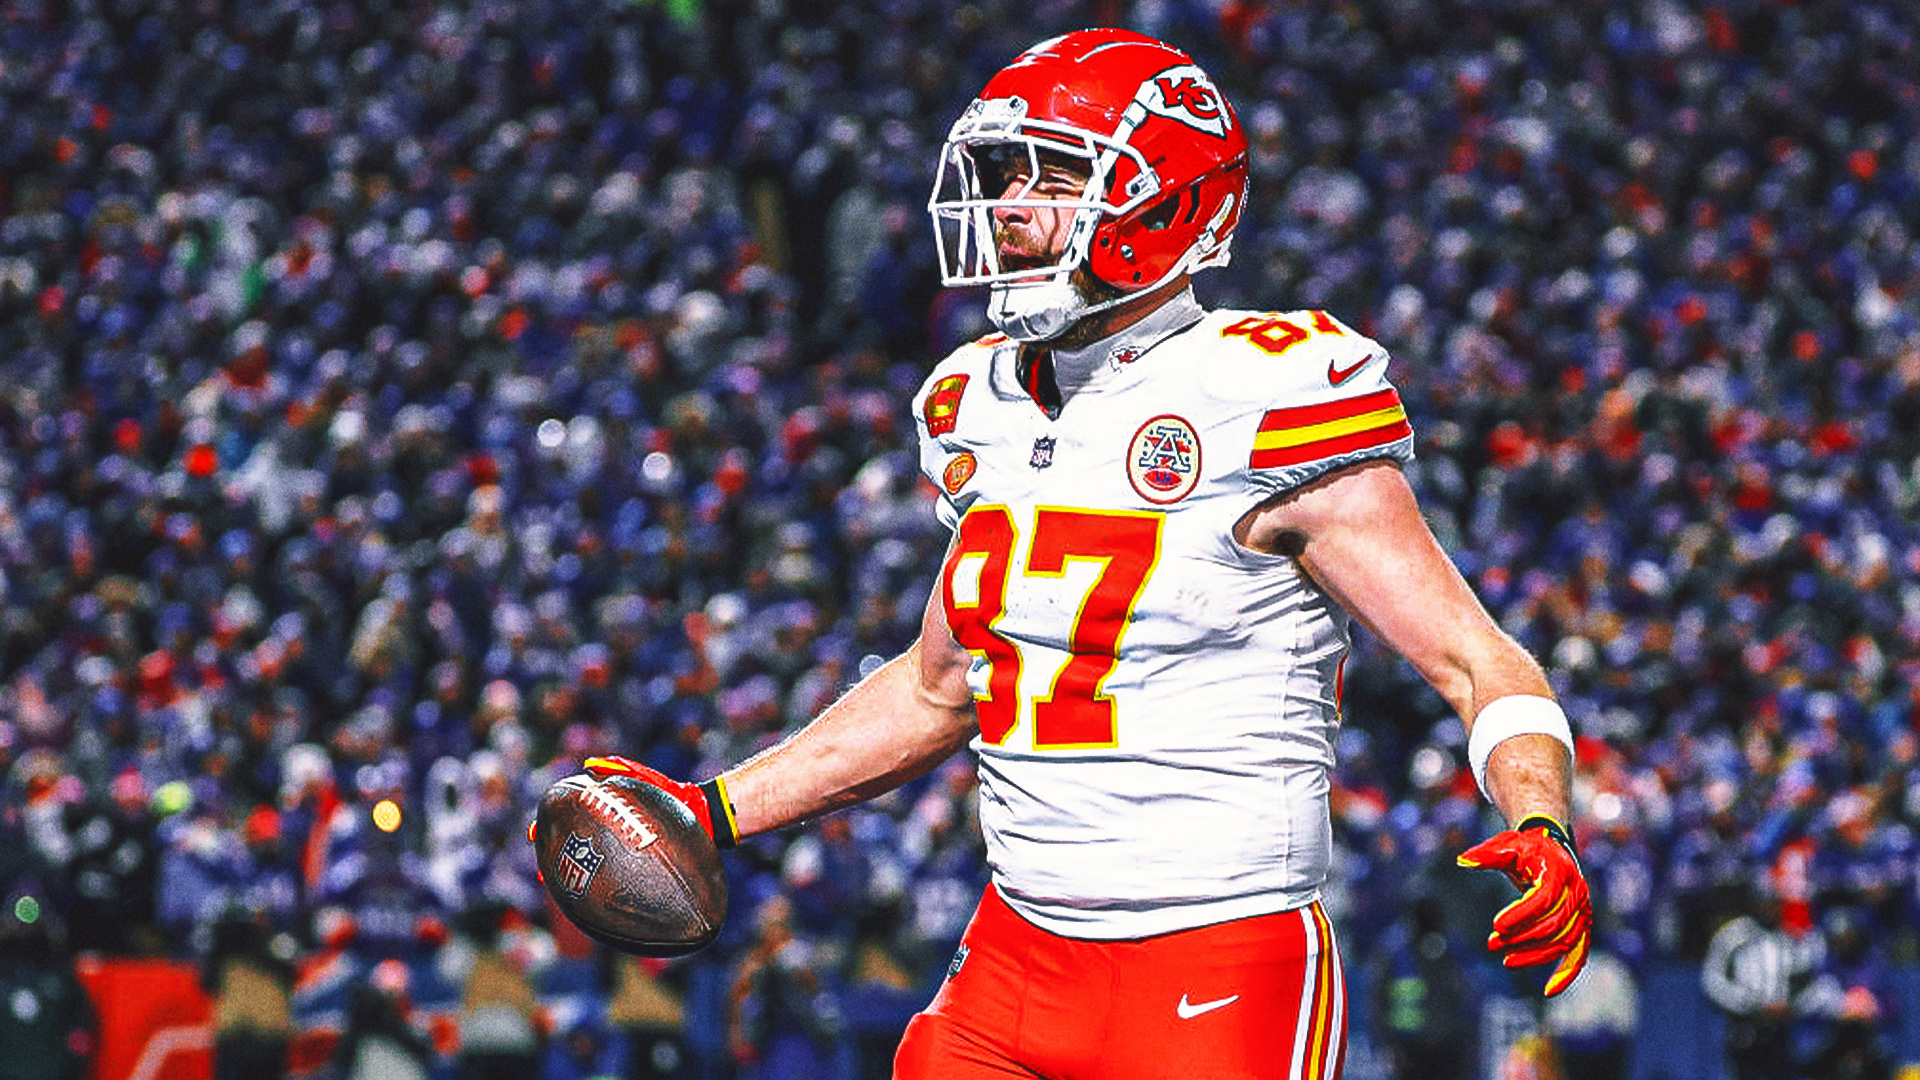 Travis Kelce scores twice as Chiefs beat Bills 27-24 in another playoff classic